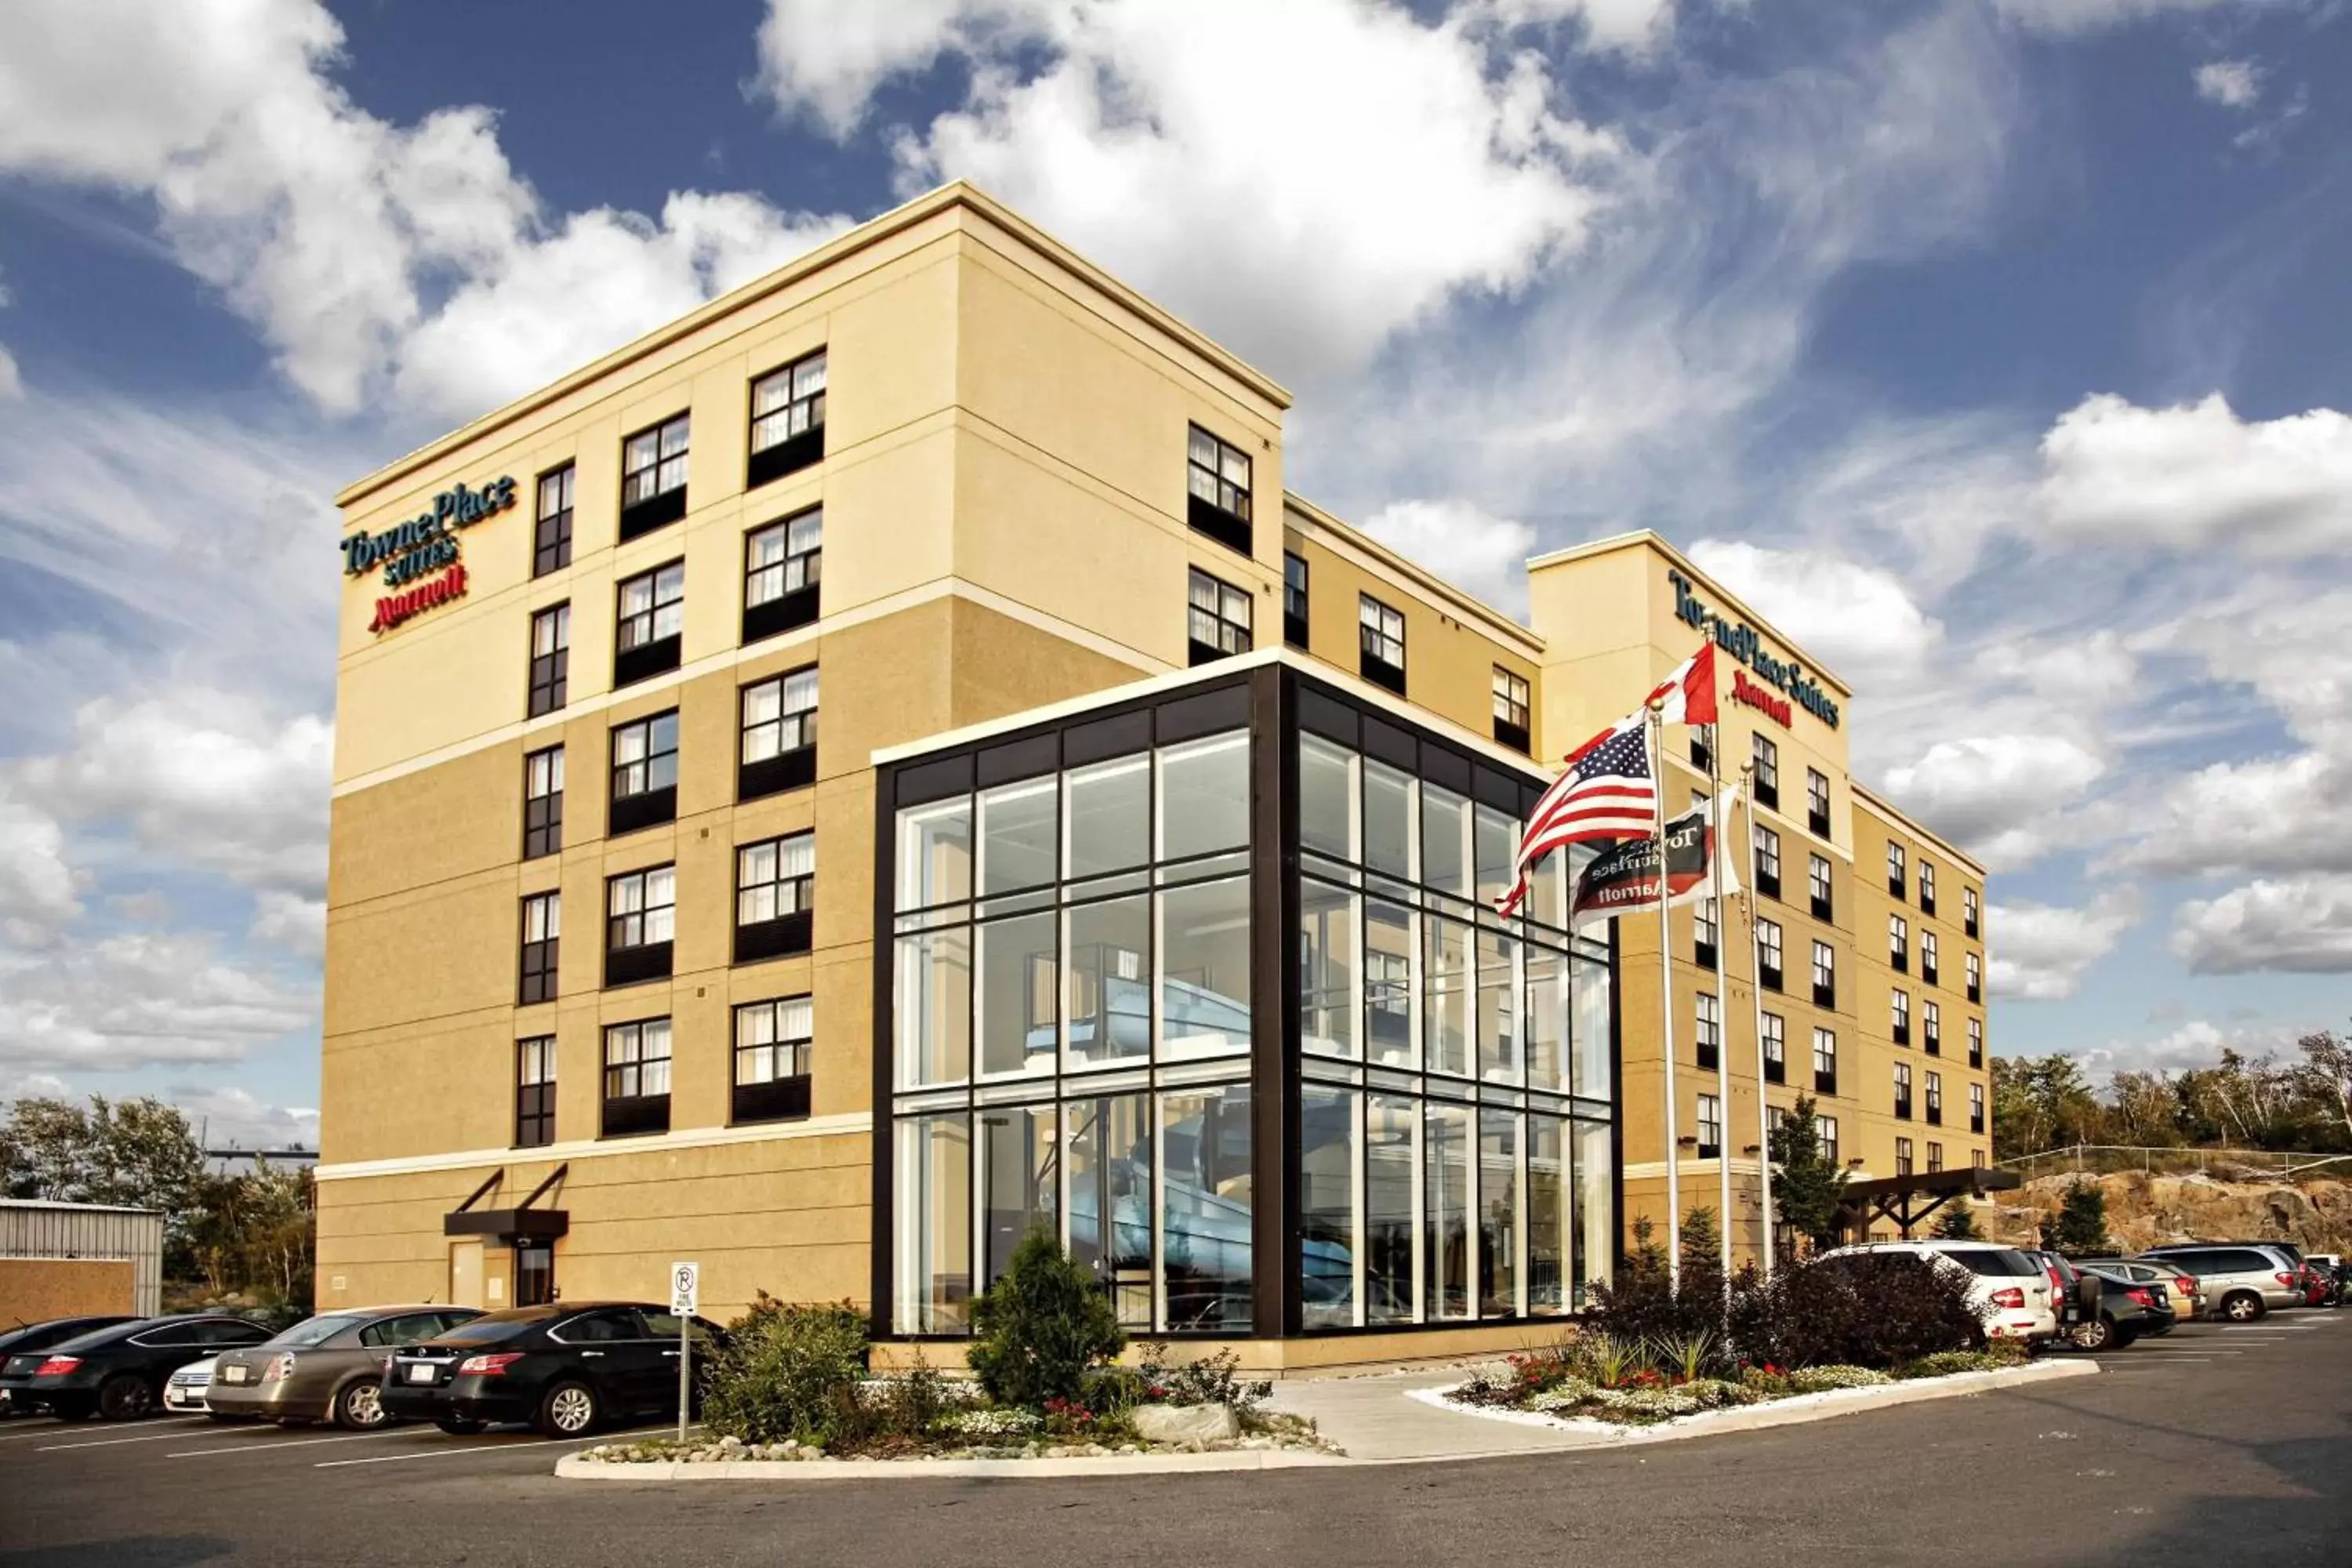 Property Building in TownePlace Suites by Marriott Sudbury